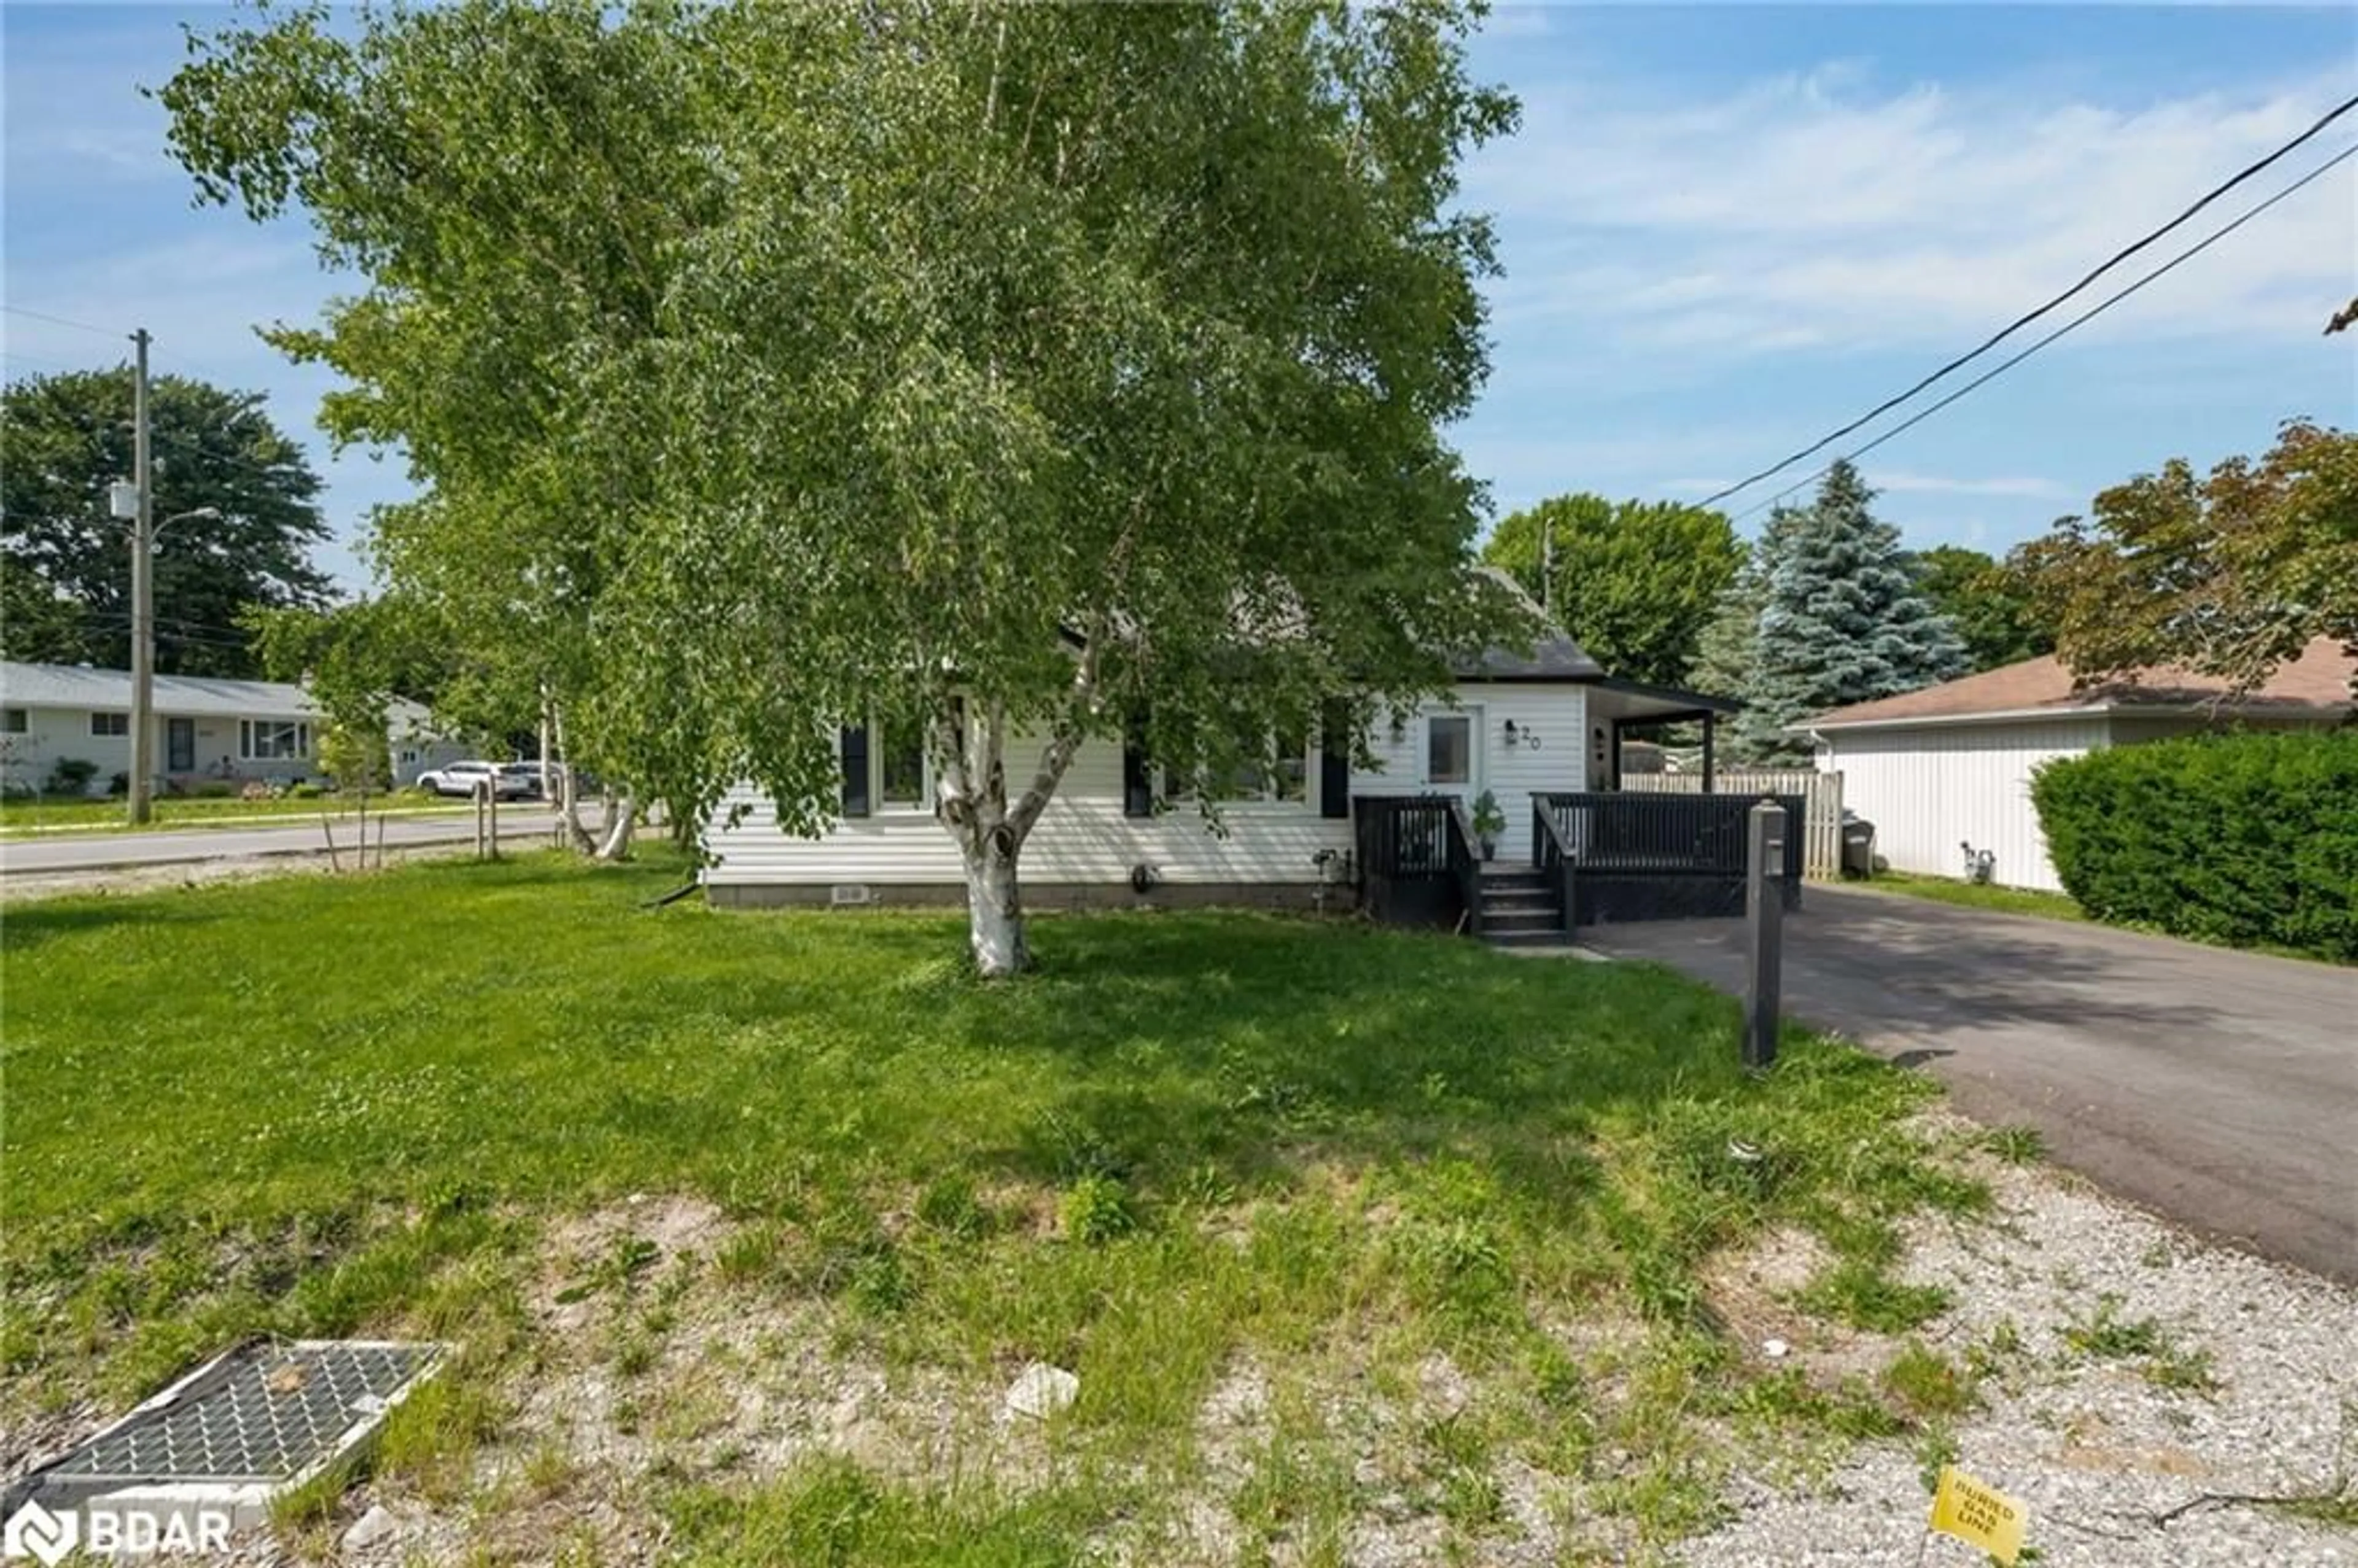 Frontside or backside of a home for 20 English Dr, Beeton Ontario L0G 1A0